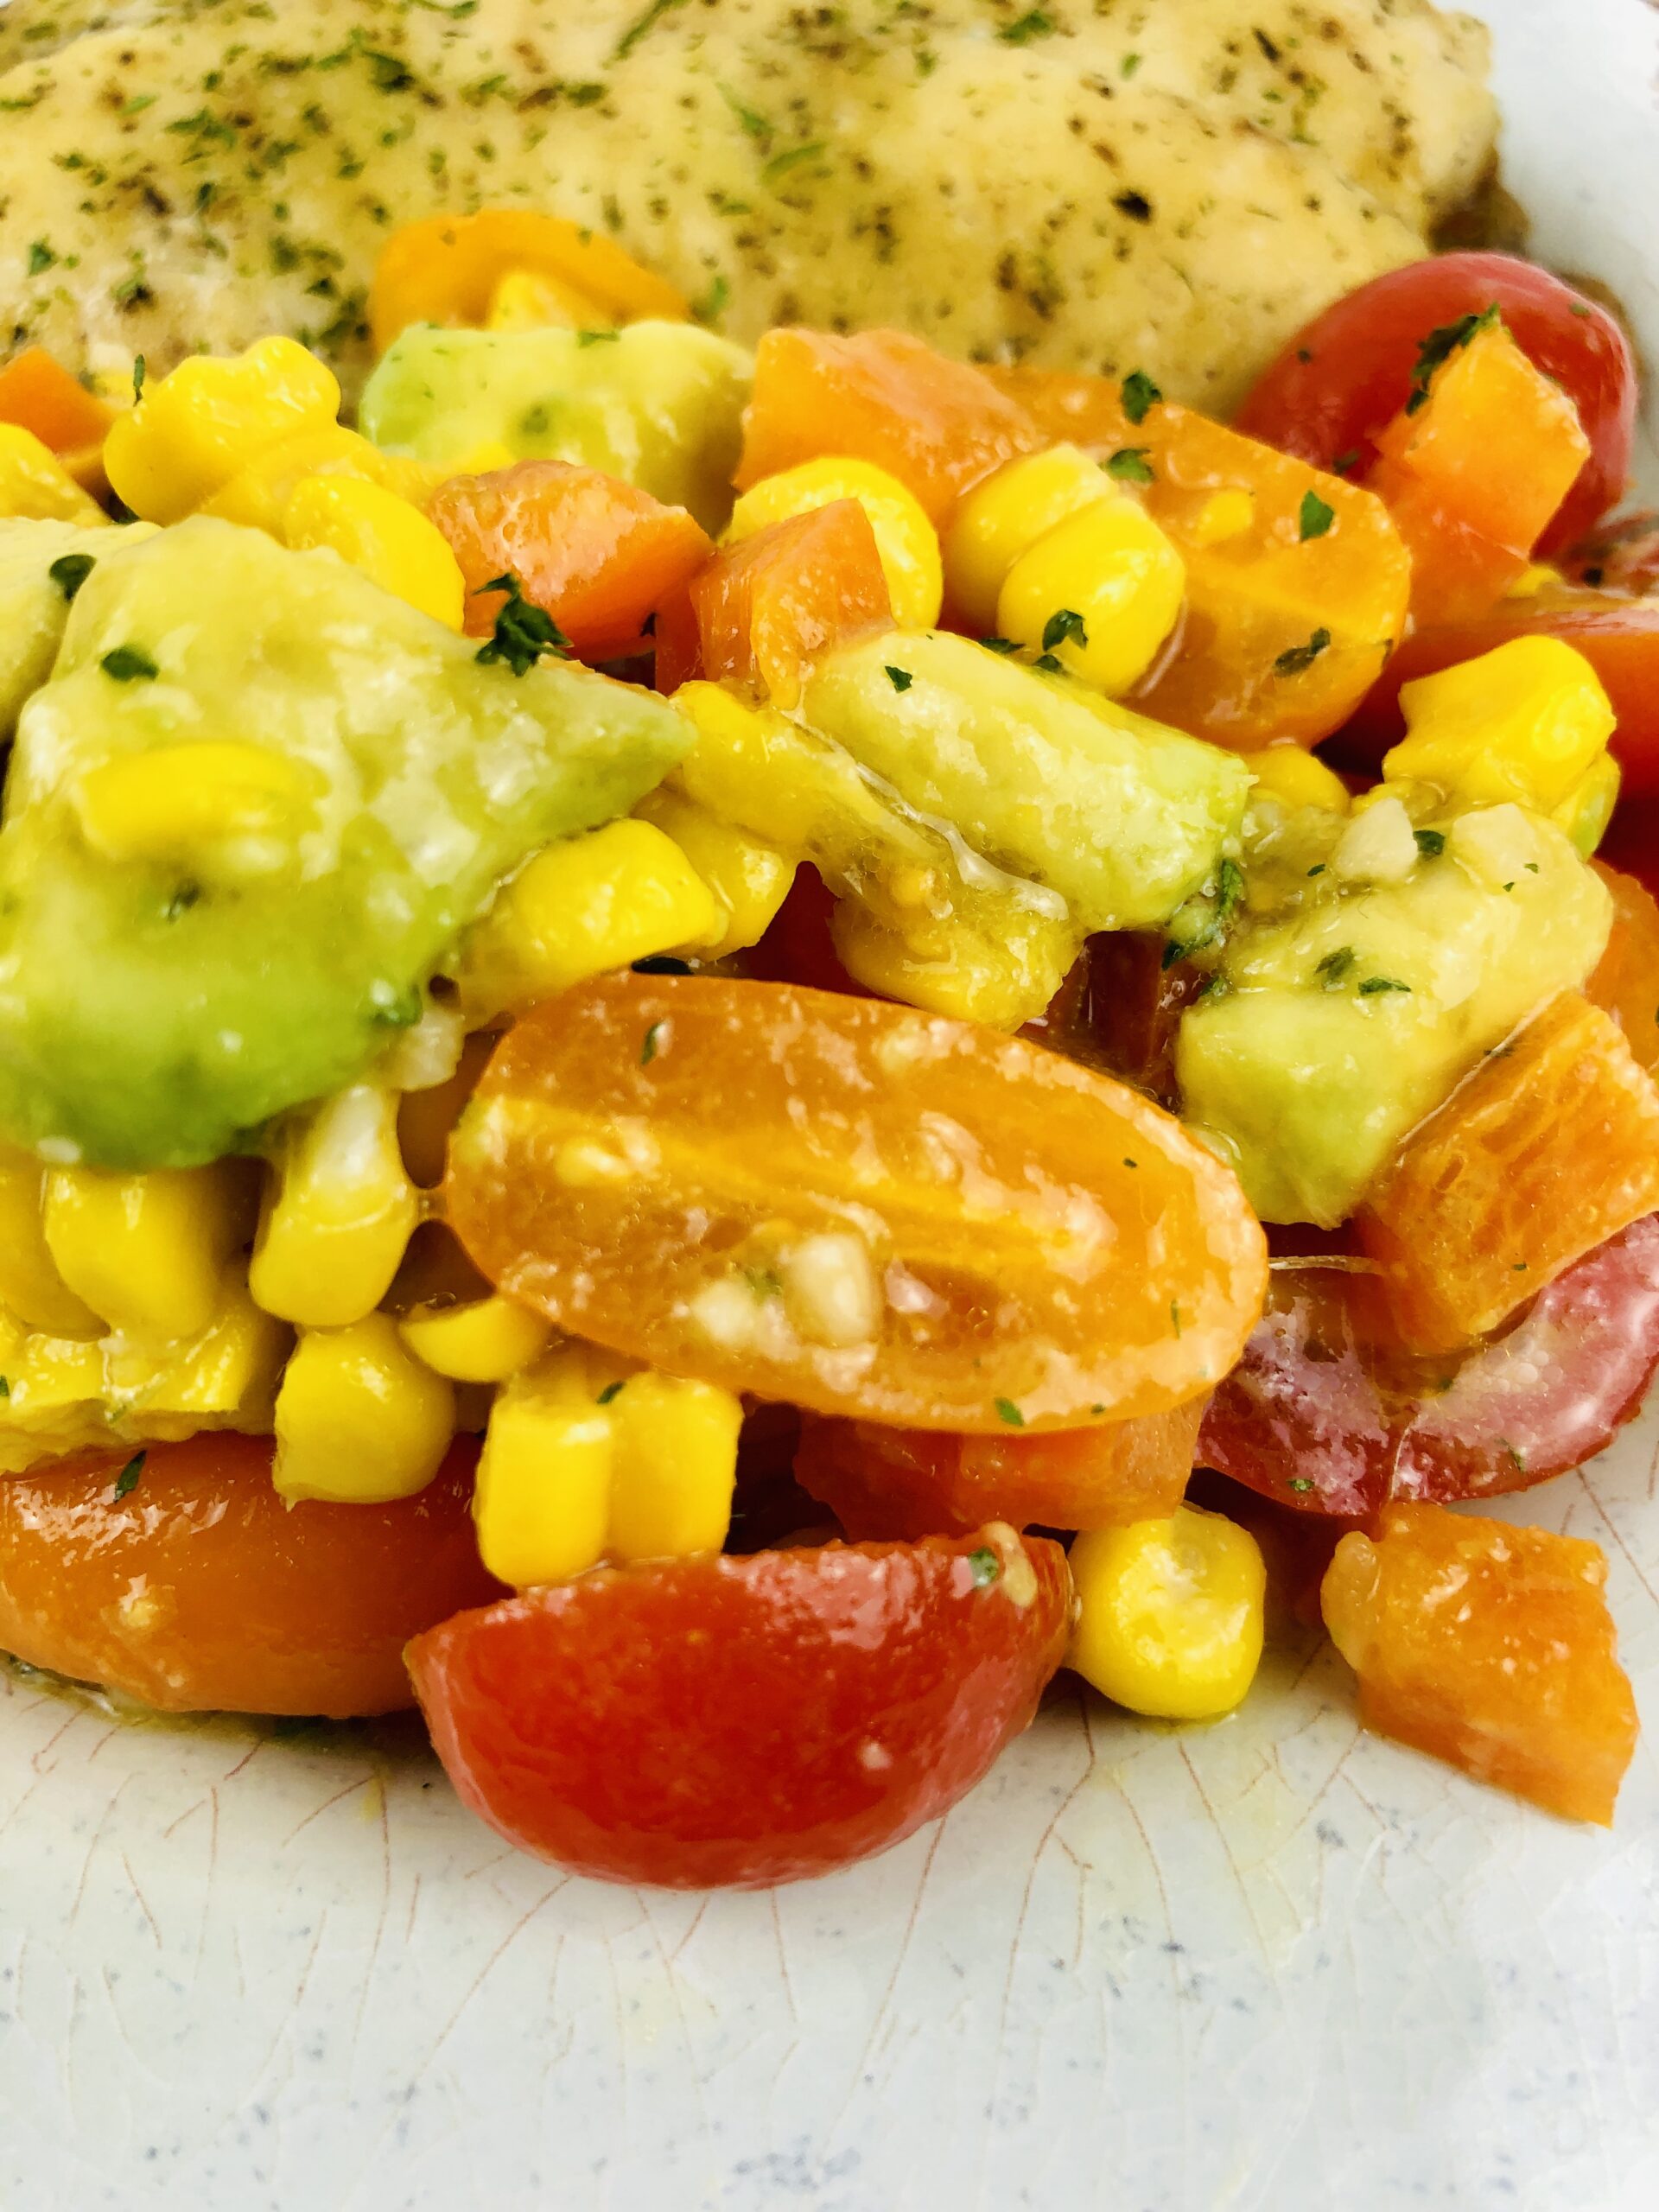 A colorful salad with cherry tomatoes, corn, and avocado dressing on a plate with baked haddock.